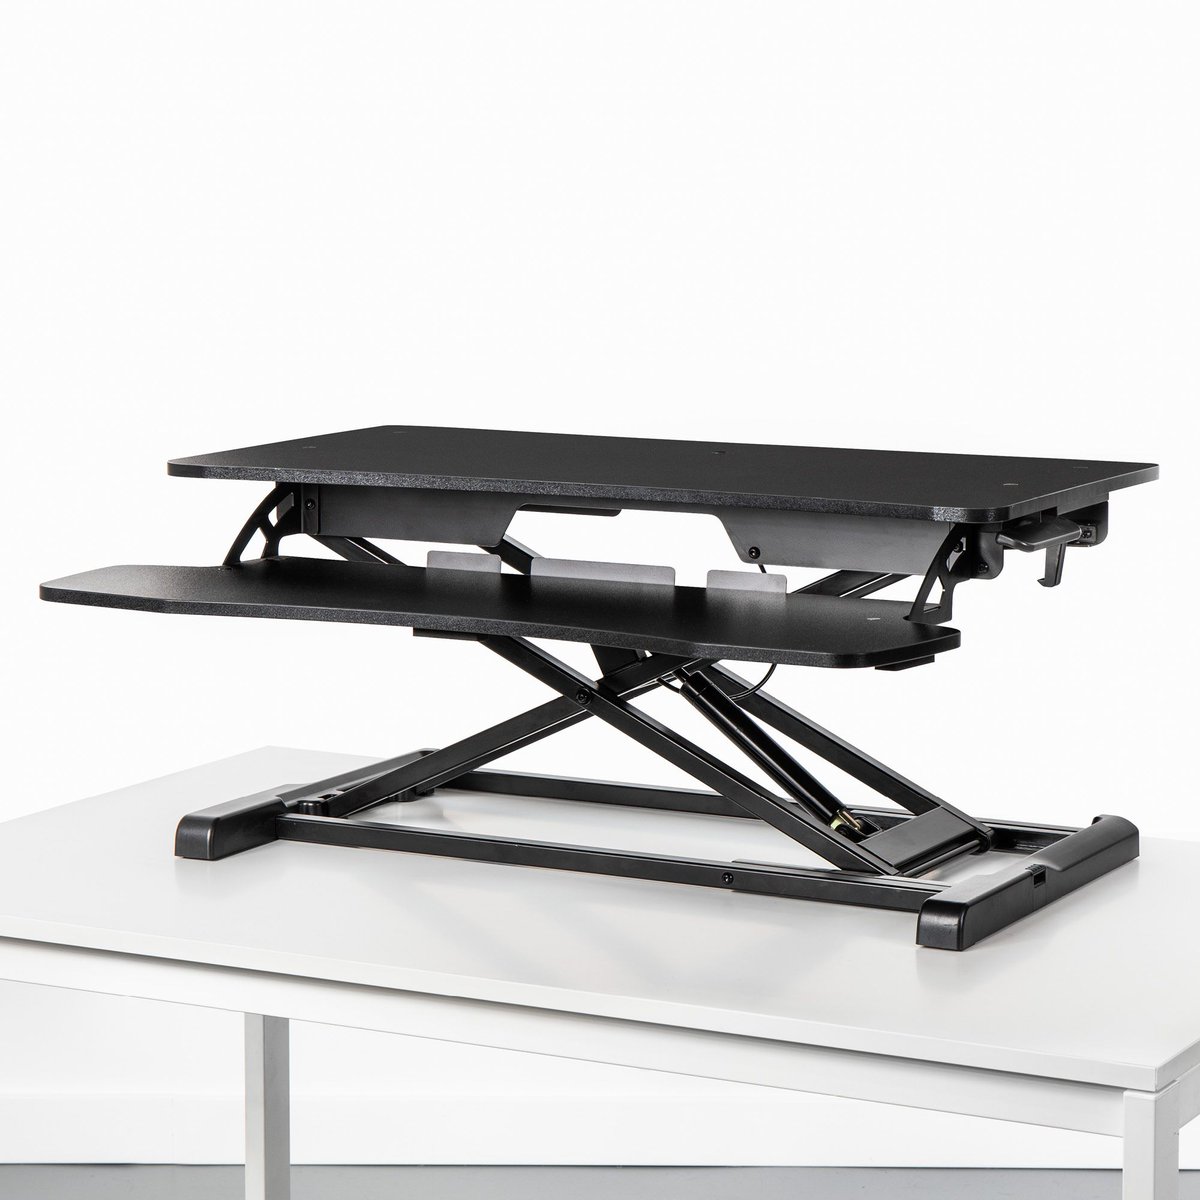 Able Desk Co On Twitter A Quality Affordable Stand Up Desk